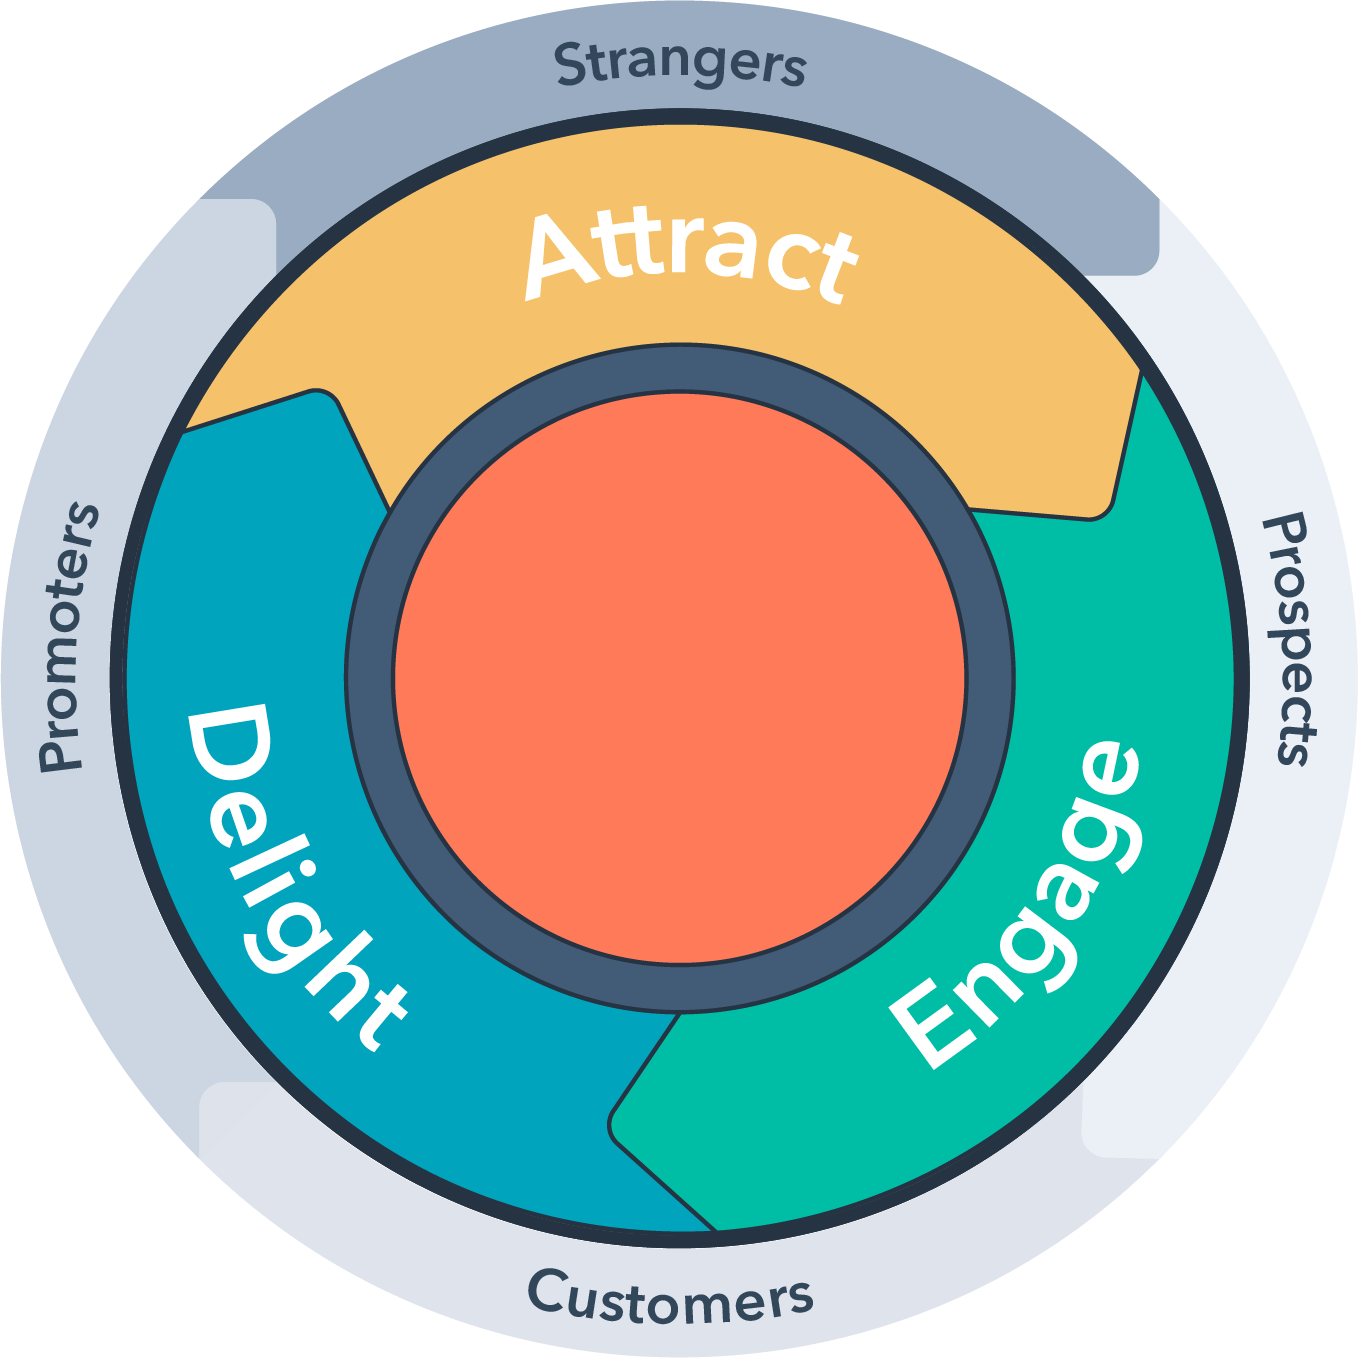 Software-as-a-Service (SaaS) marketing flywheel that follows HubSpot's Attract-Engage-Delight cyclical model with Customers in the middle.